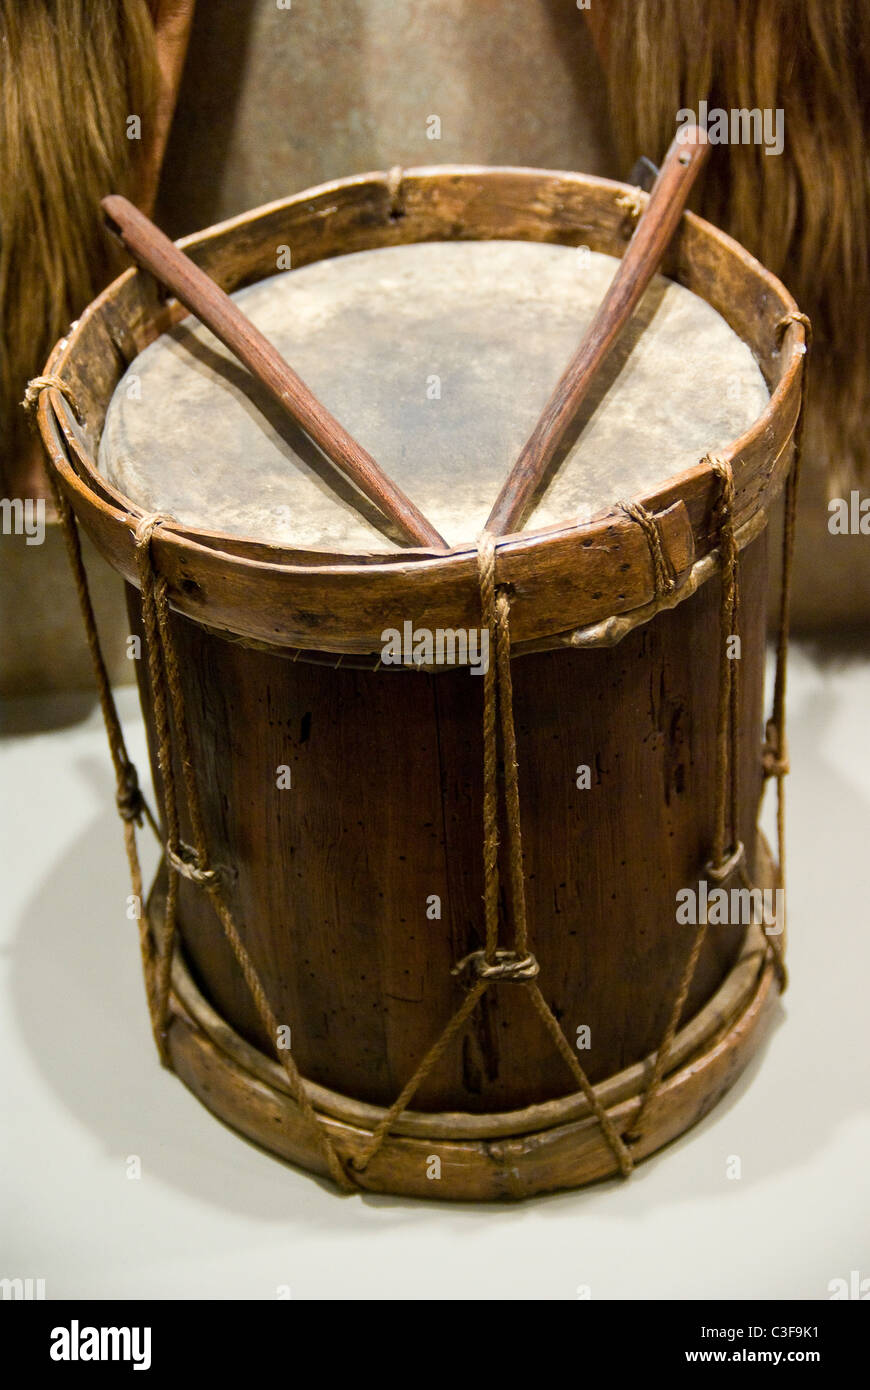 Mexico.Mexico city.National Museum of Anthropology.Nahuatl people culture. Musical instruments. Stock Photo